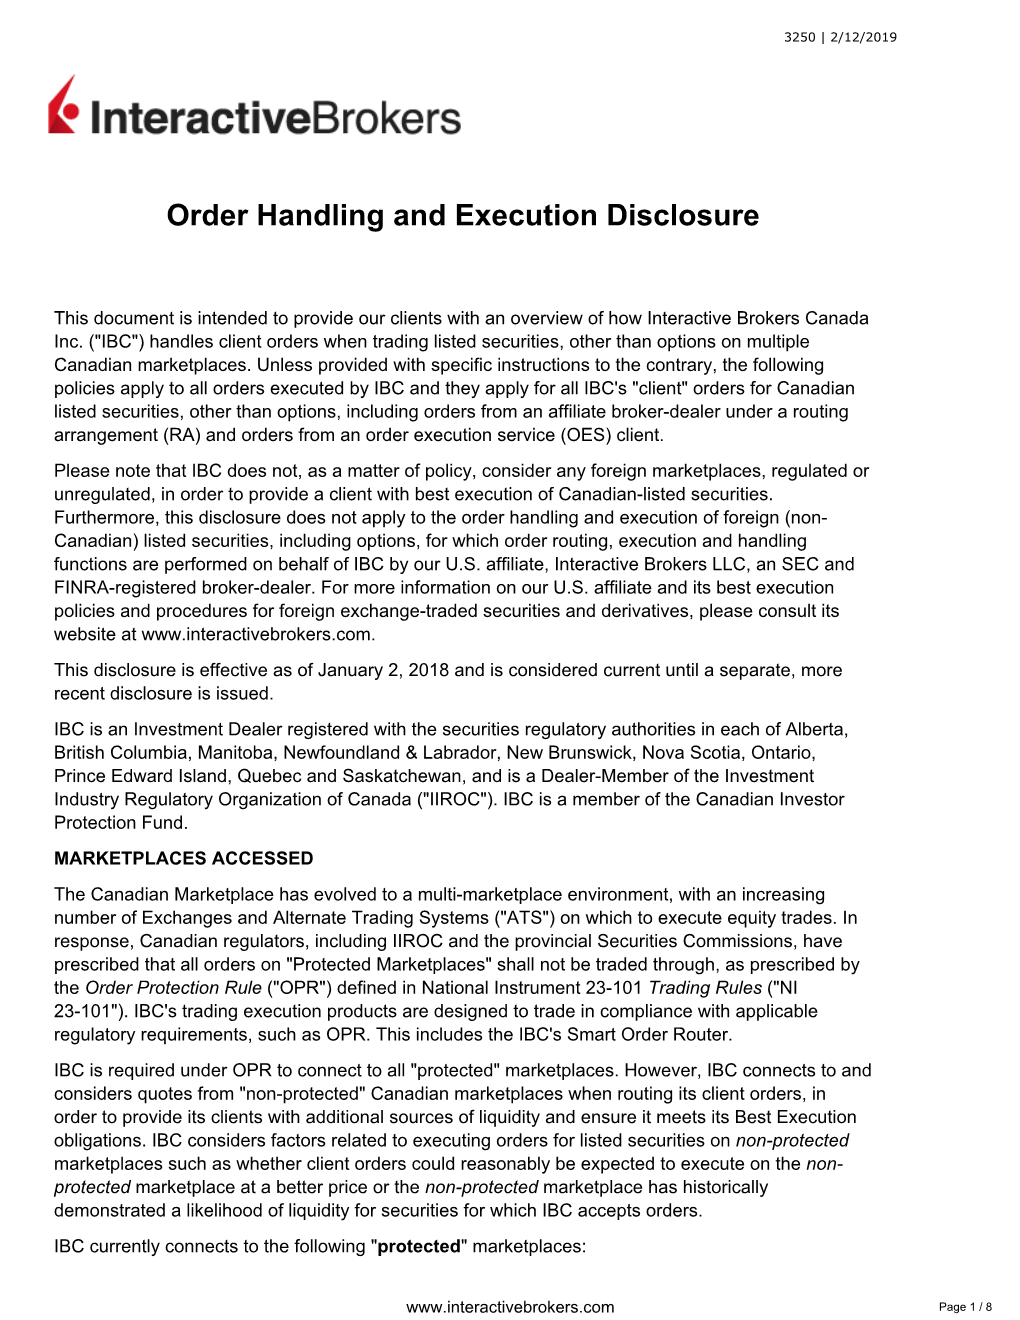 Order Handling and Execution Disclosure